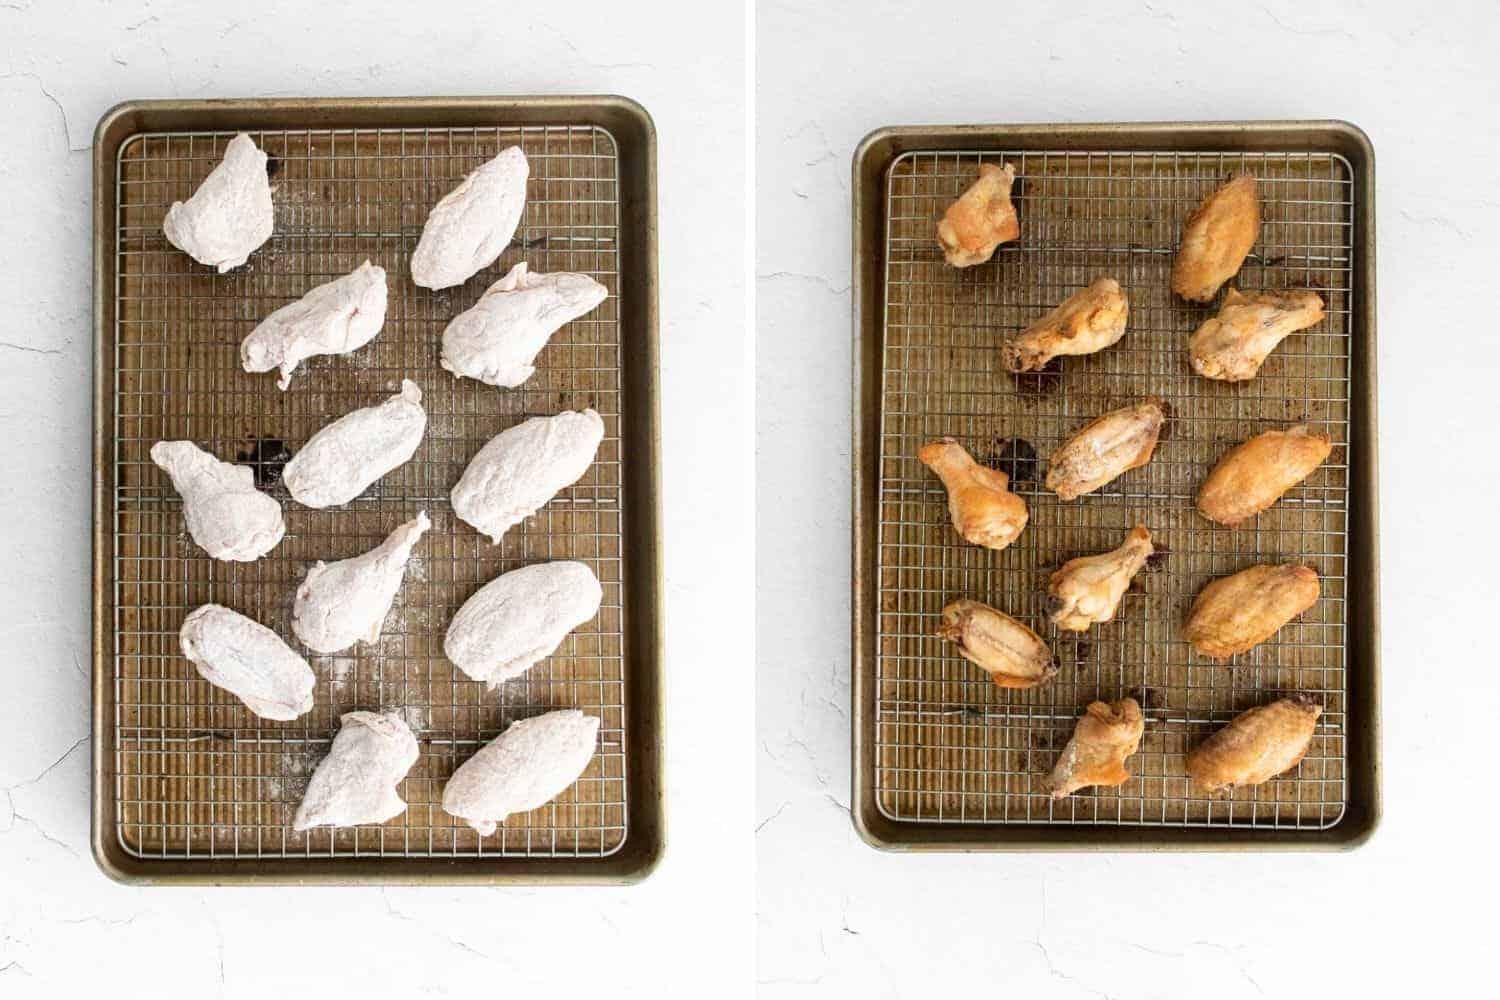 Wing on a baking sheet, unbaked on left, baked on right.